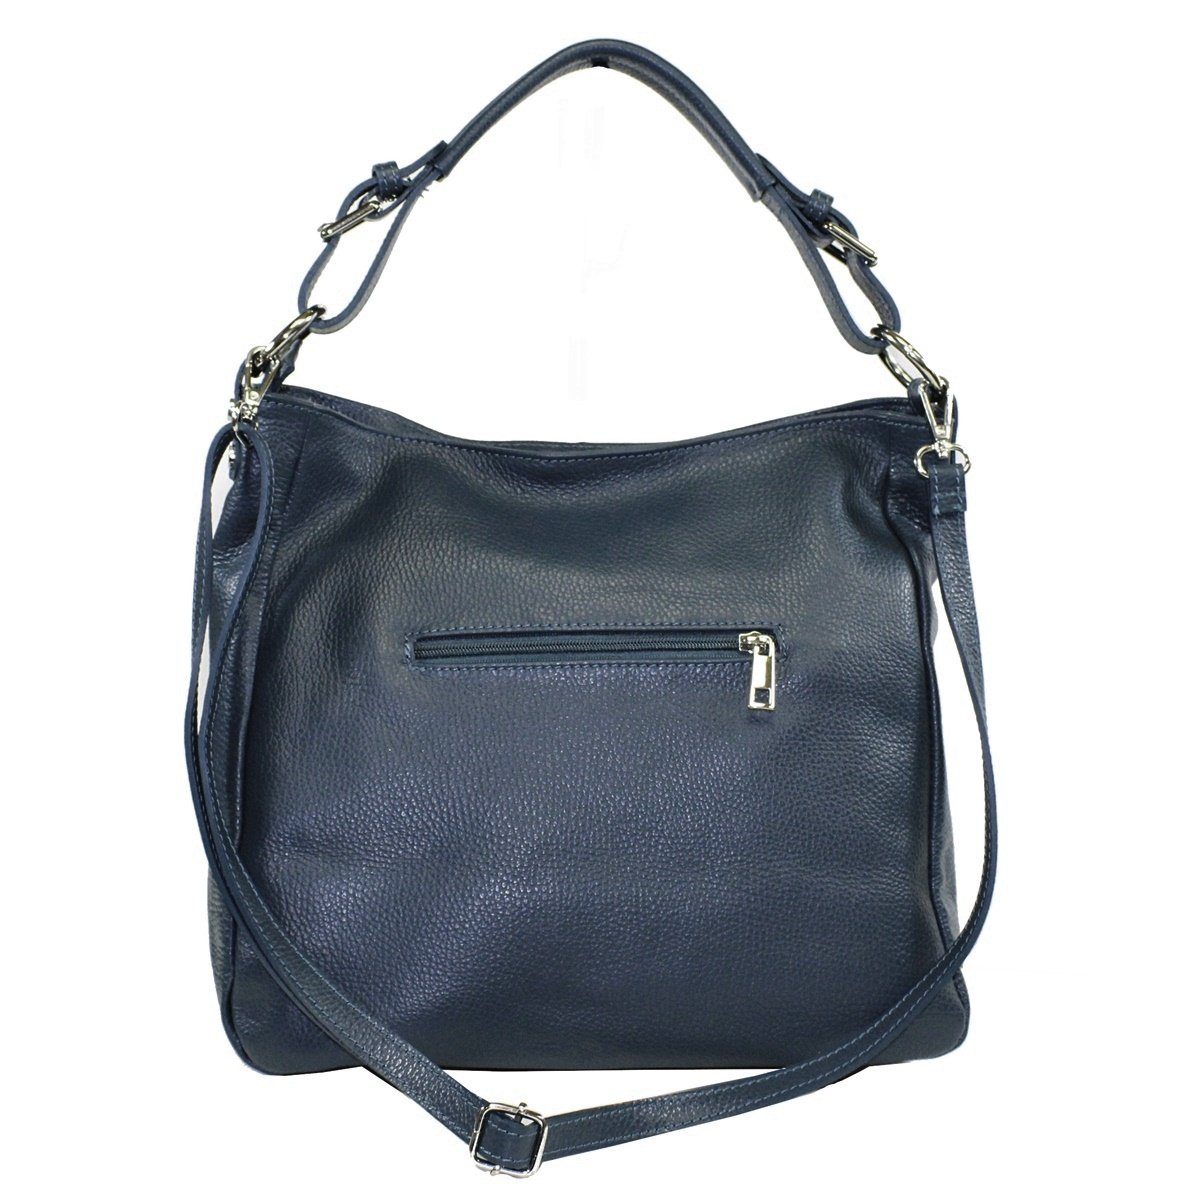 Made fs7142, fs-bags Italy Handtasche Navy in